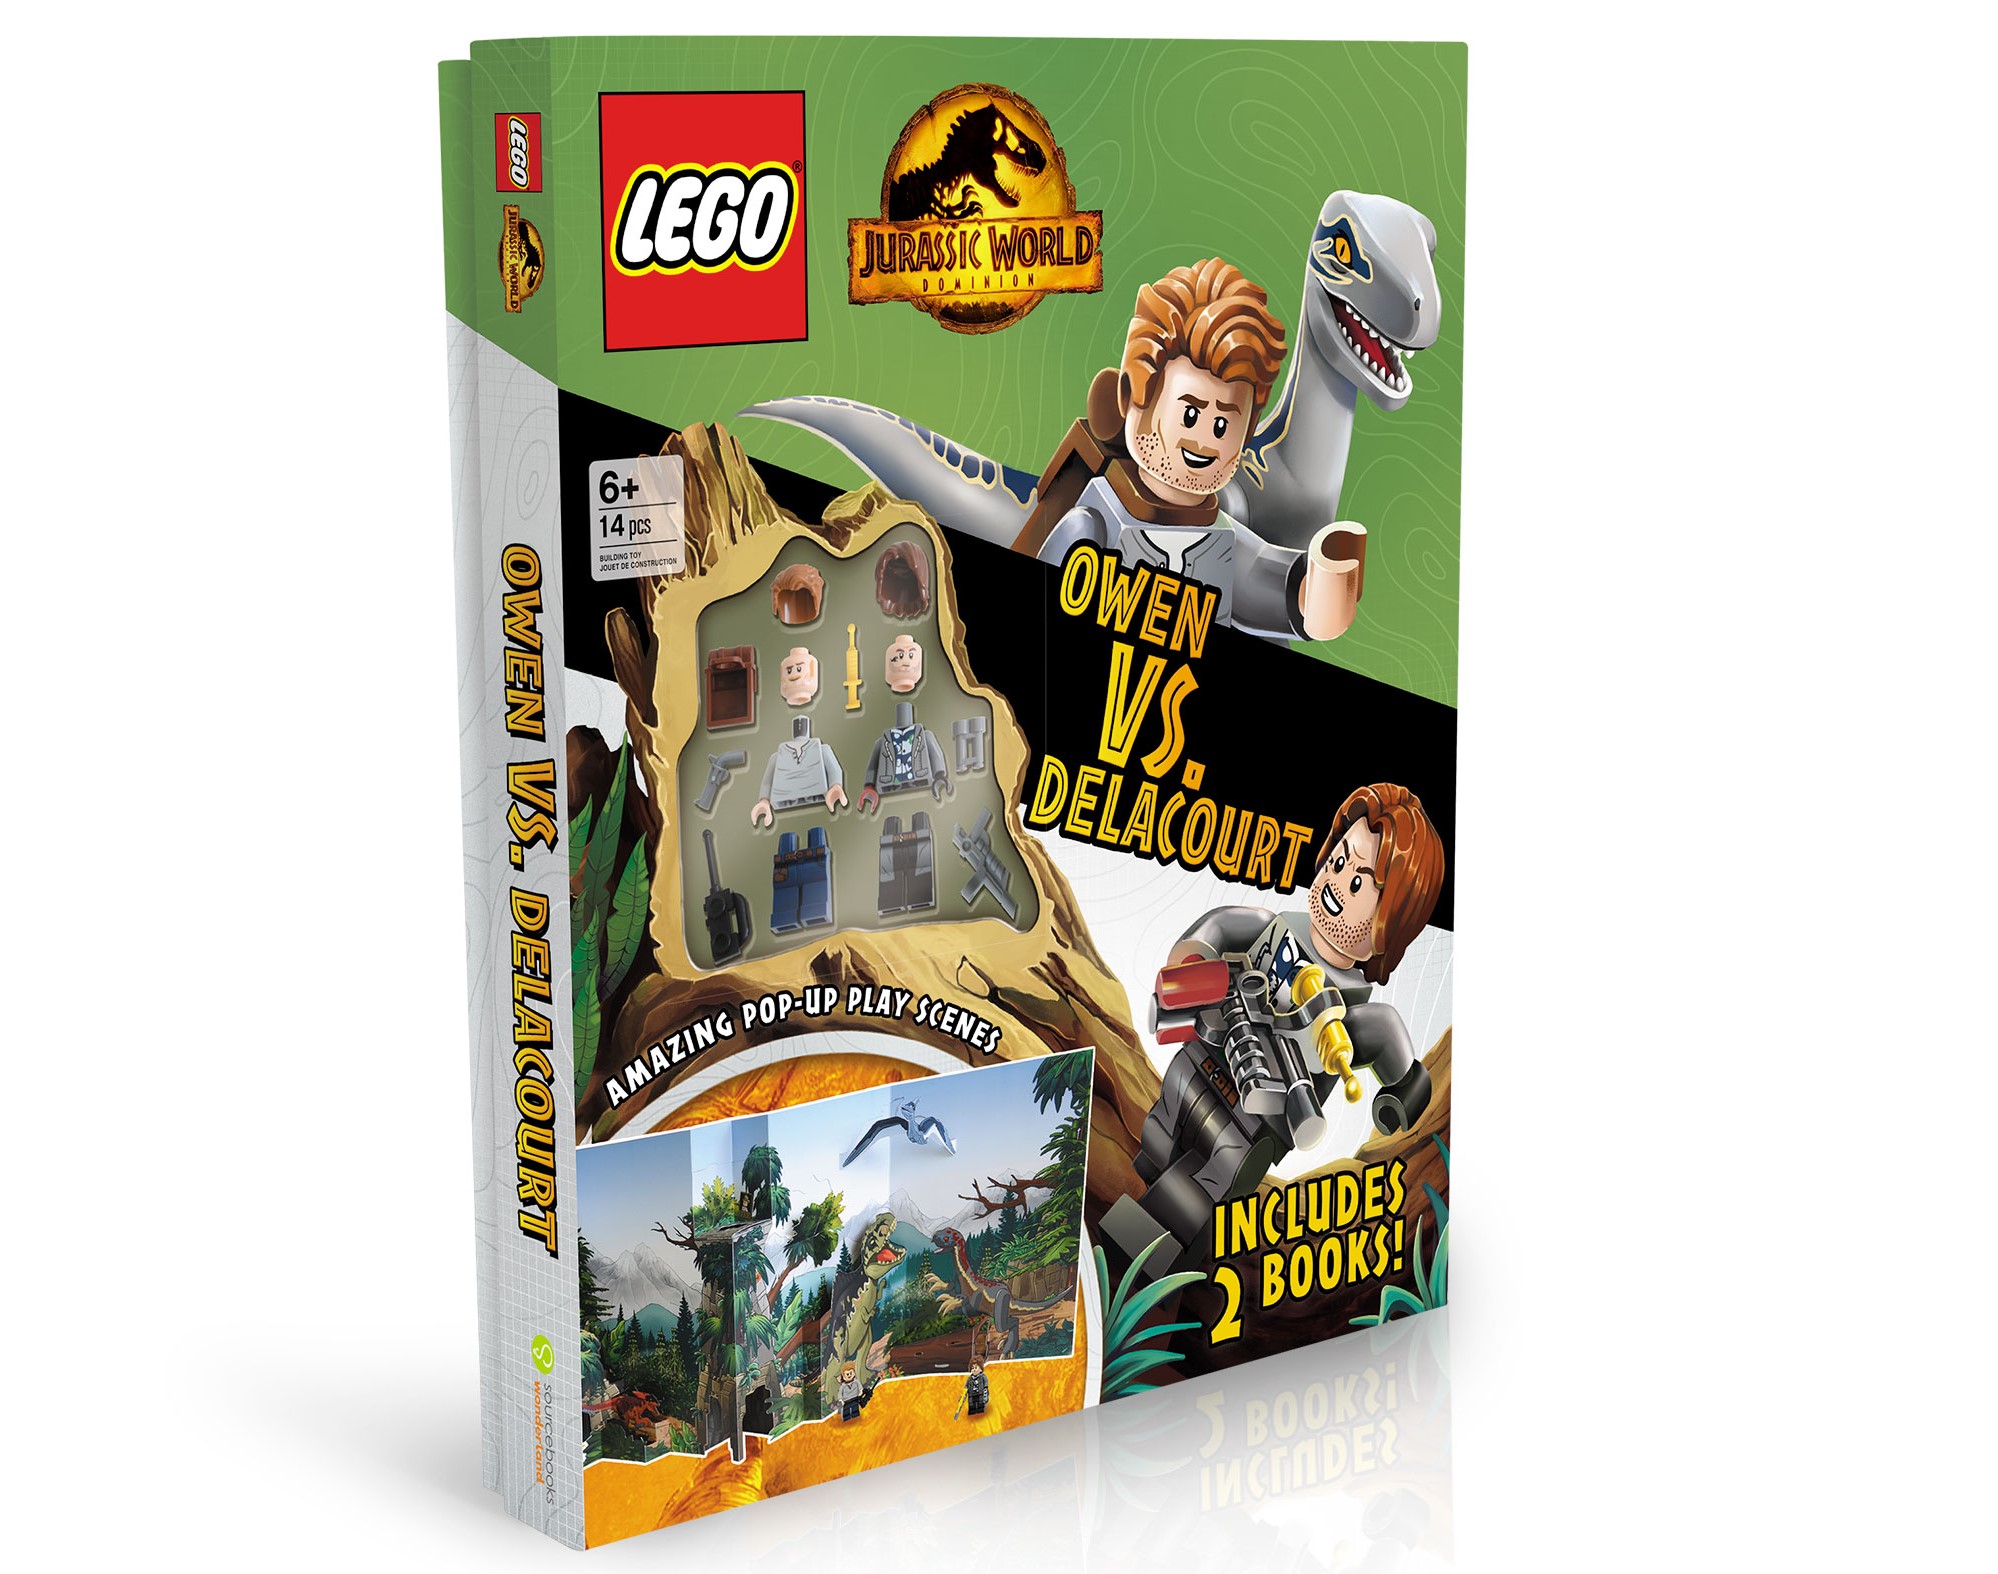 LEGO Jurassic World 5-Minute Stories Collection (LEGO Jurassic